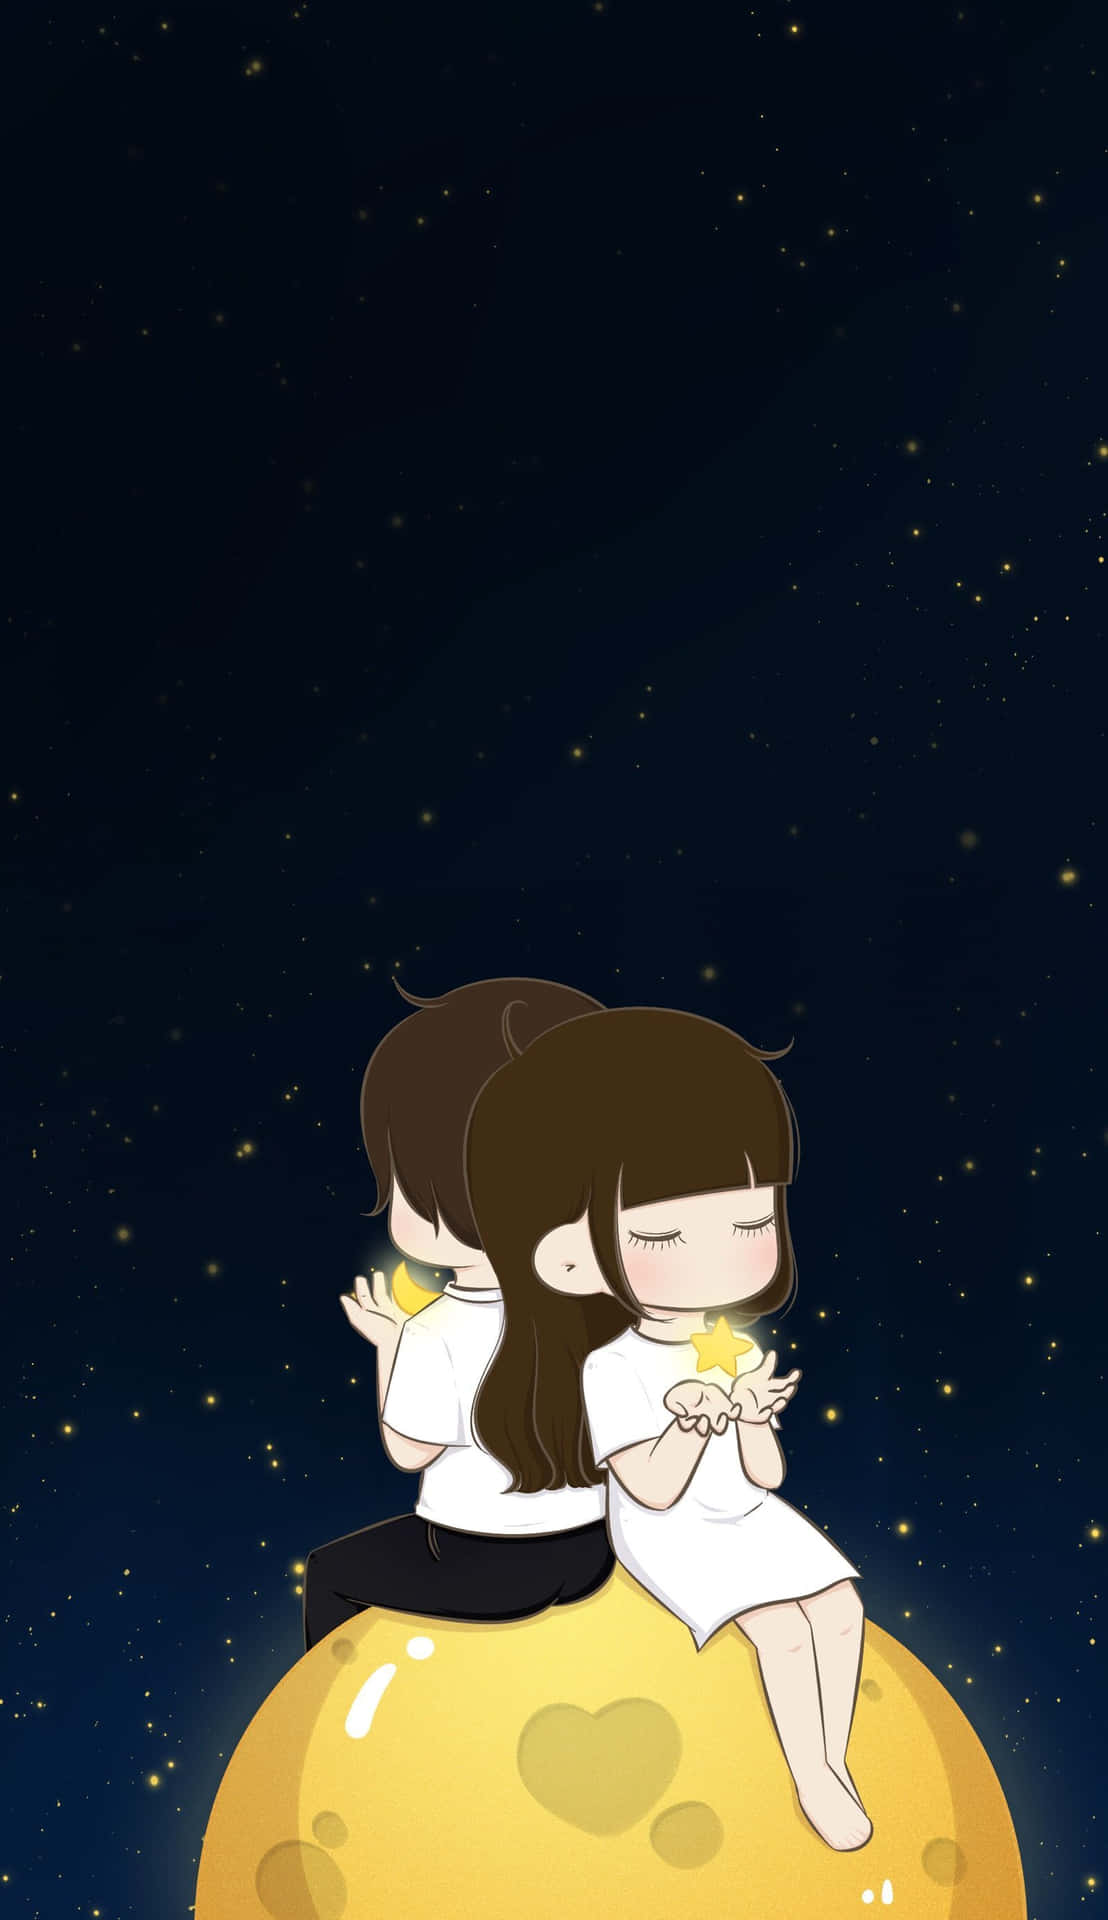 Download Couple Cartoon Pictures | Wallpapers.com